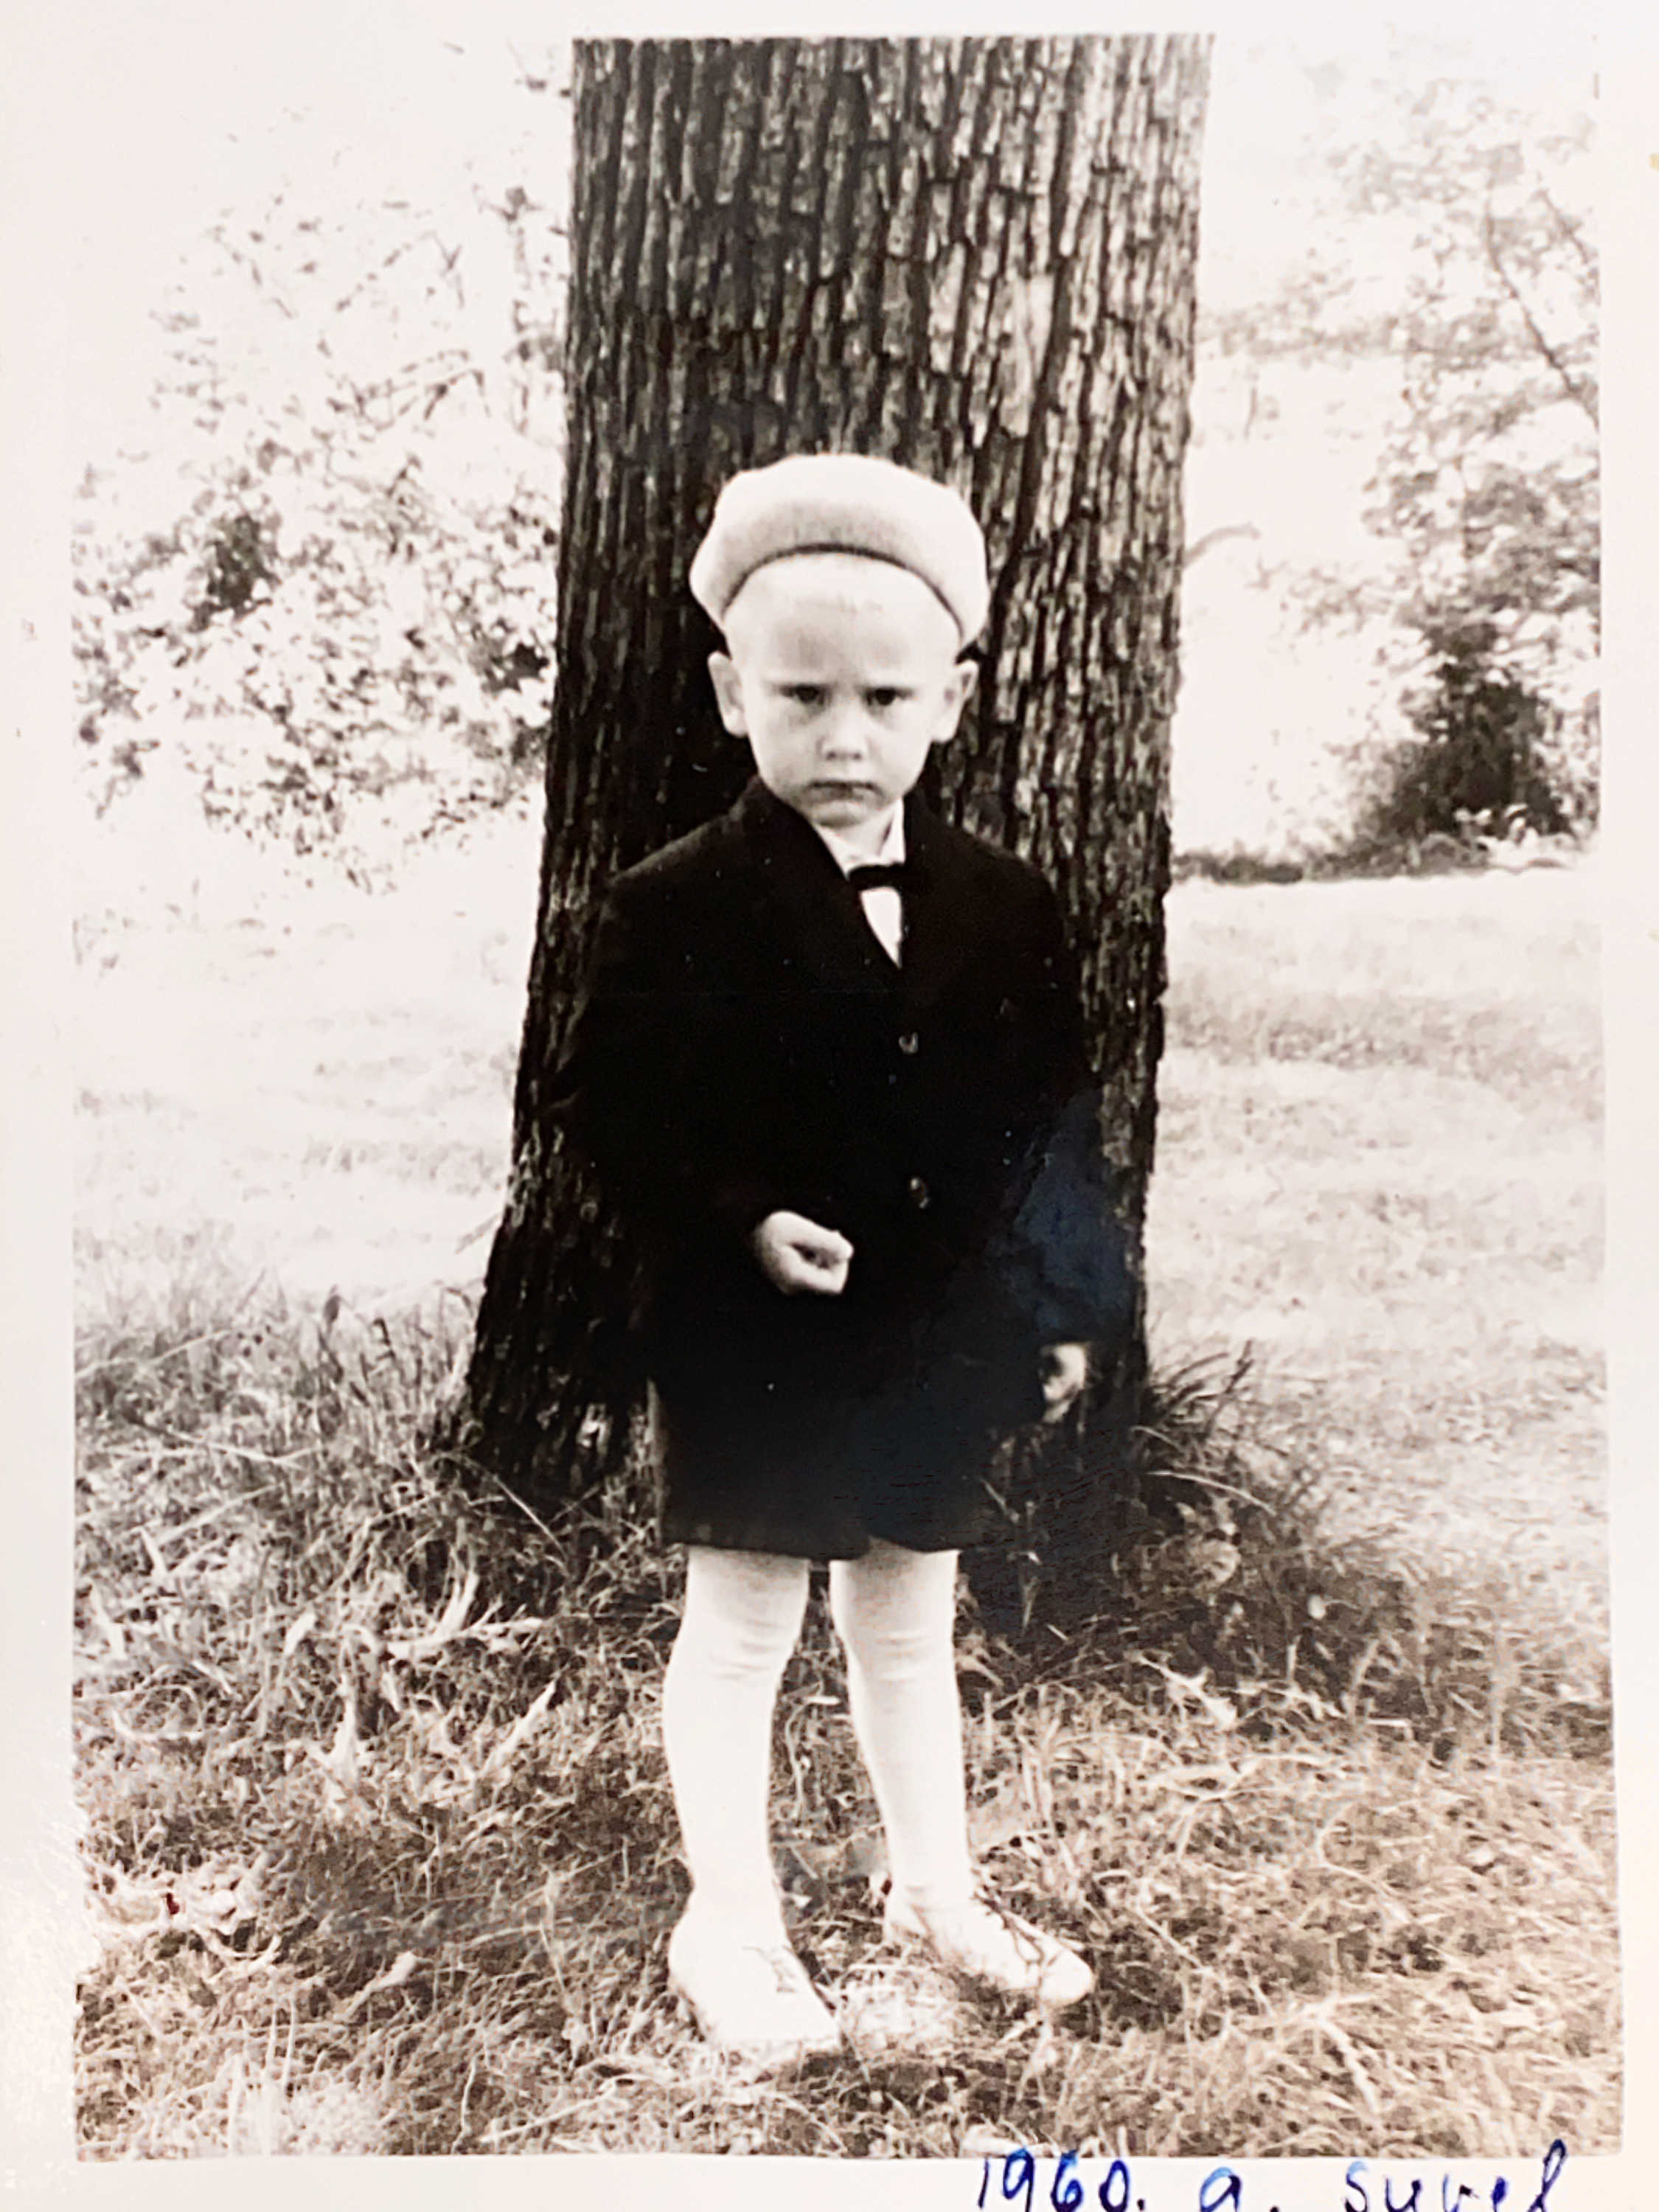 Boy standing in front of the tree